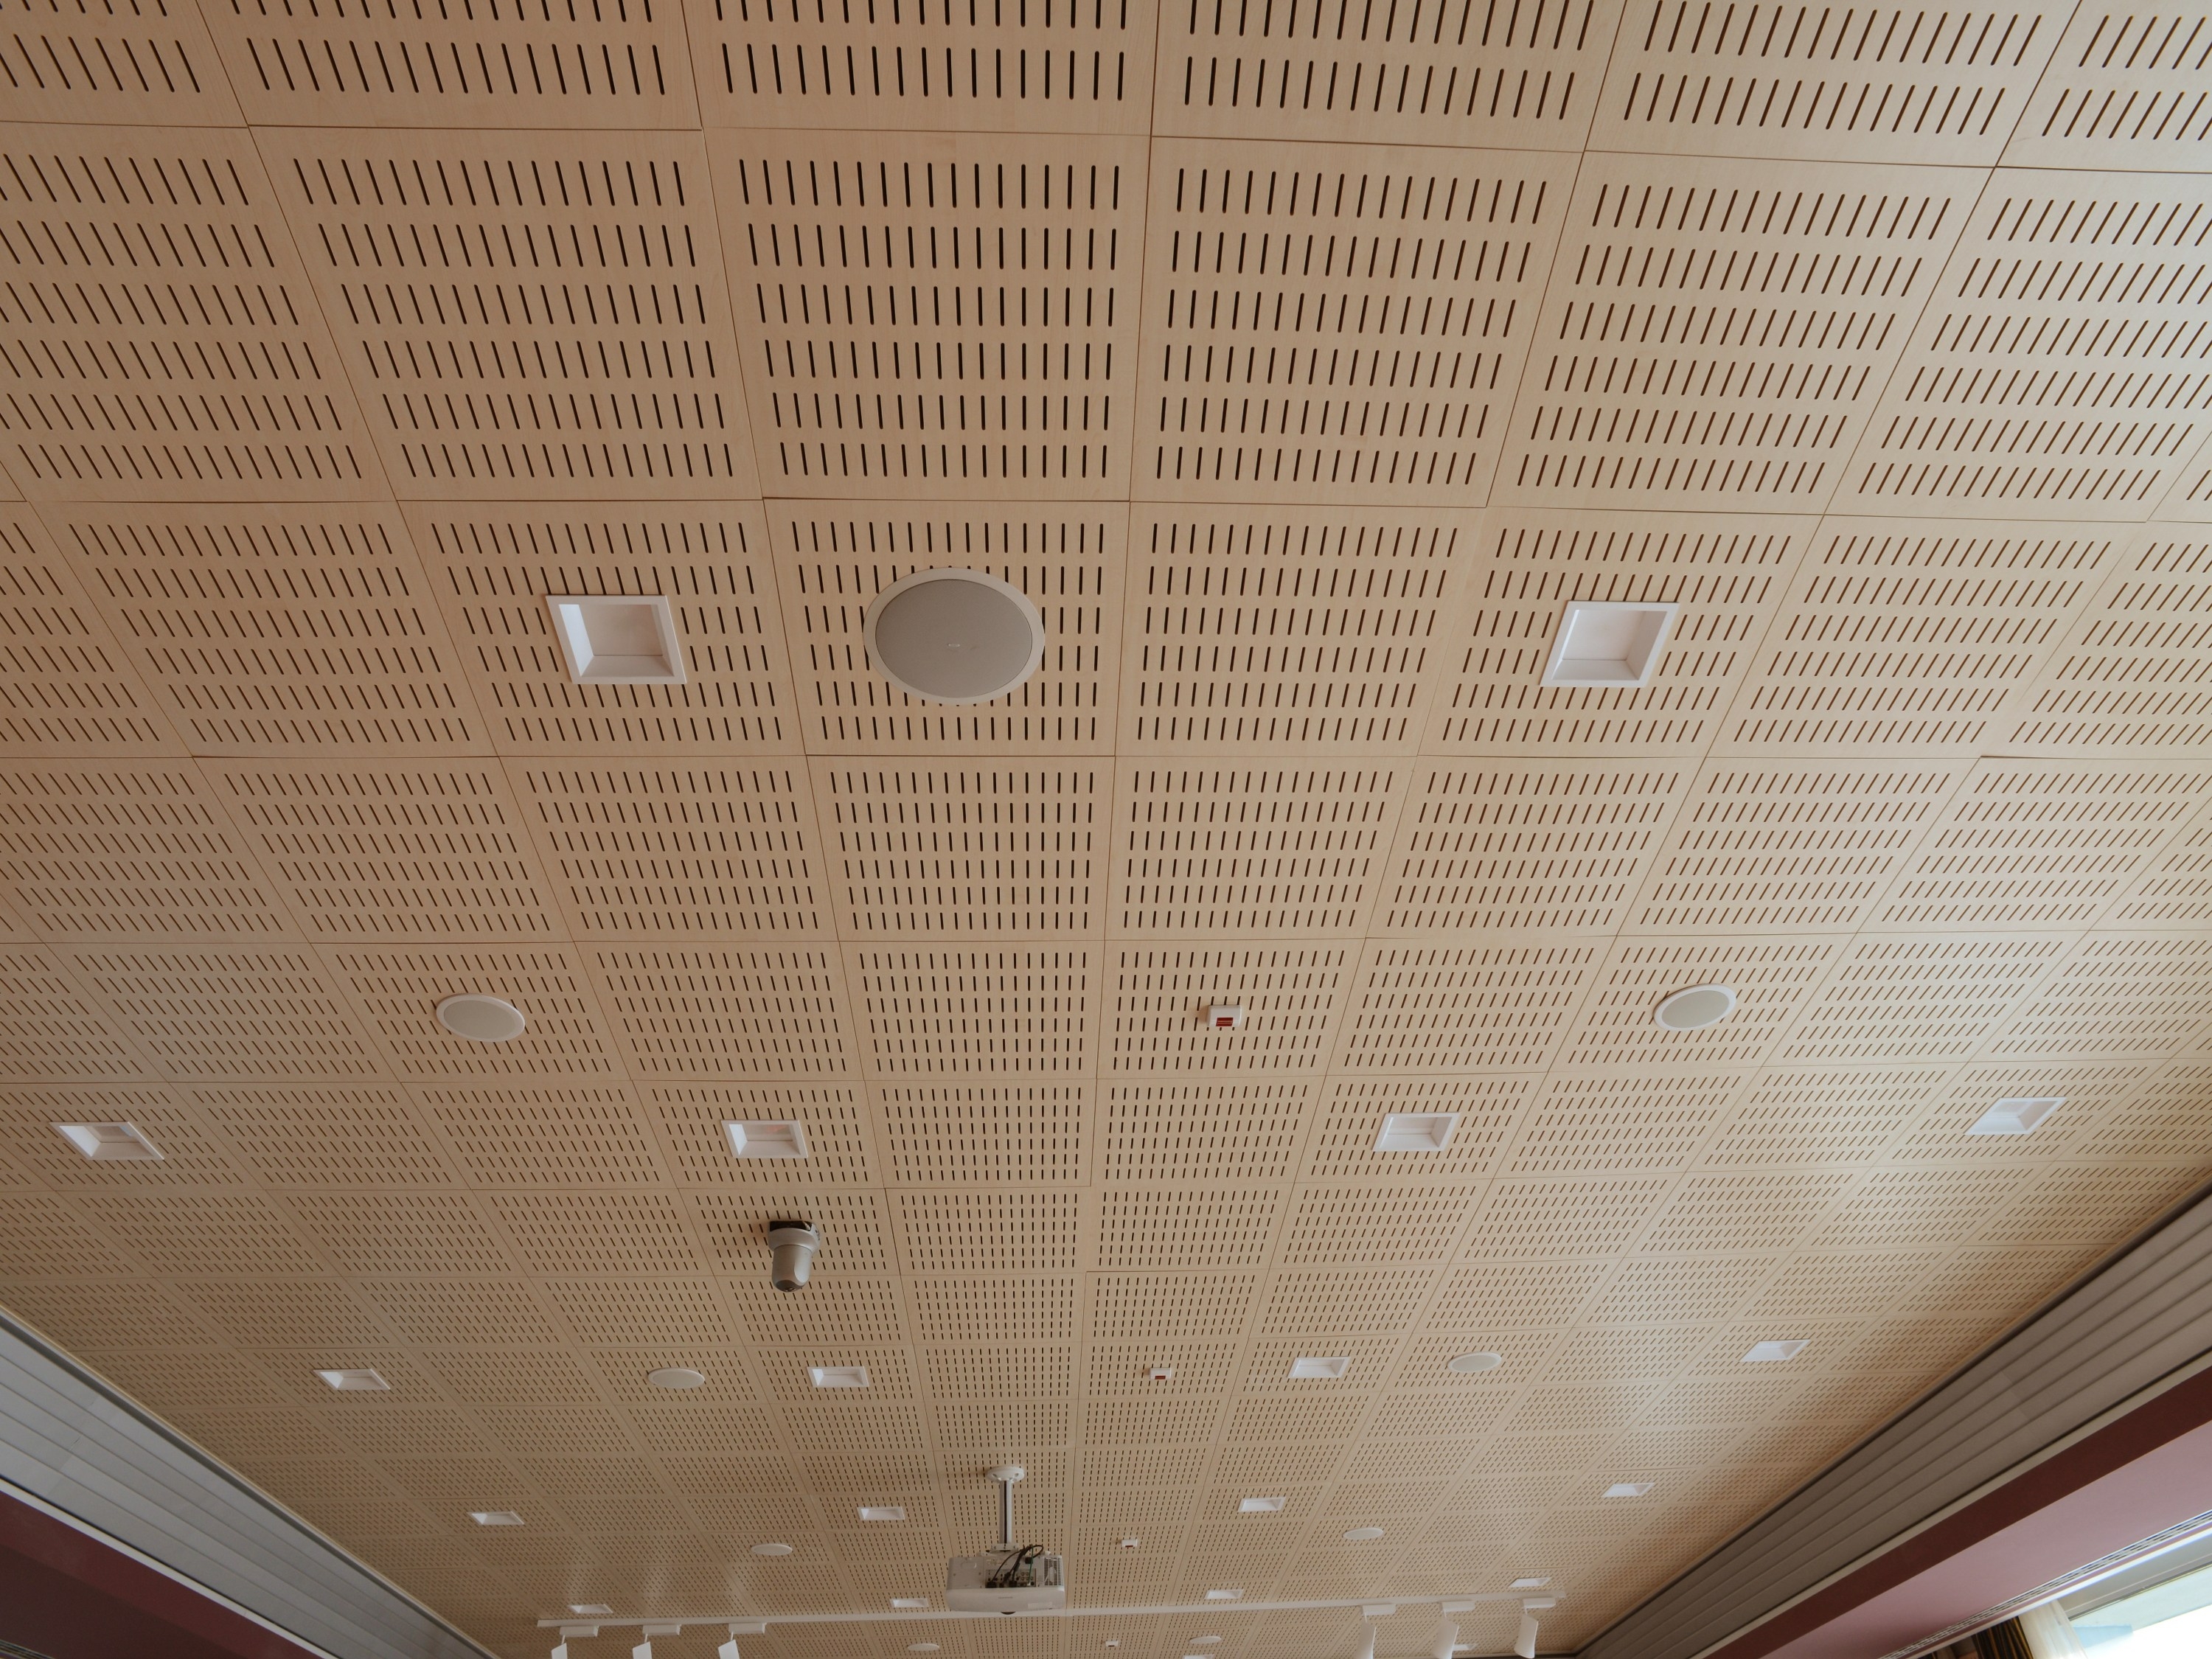 Covering Up Acoustic Ceiling Tiles Covering Up Acoustic Ceiling Tiles acoustic ceiling tiles for the clever ideas home decor and 3000 X 2250